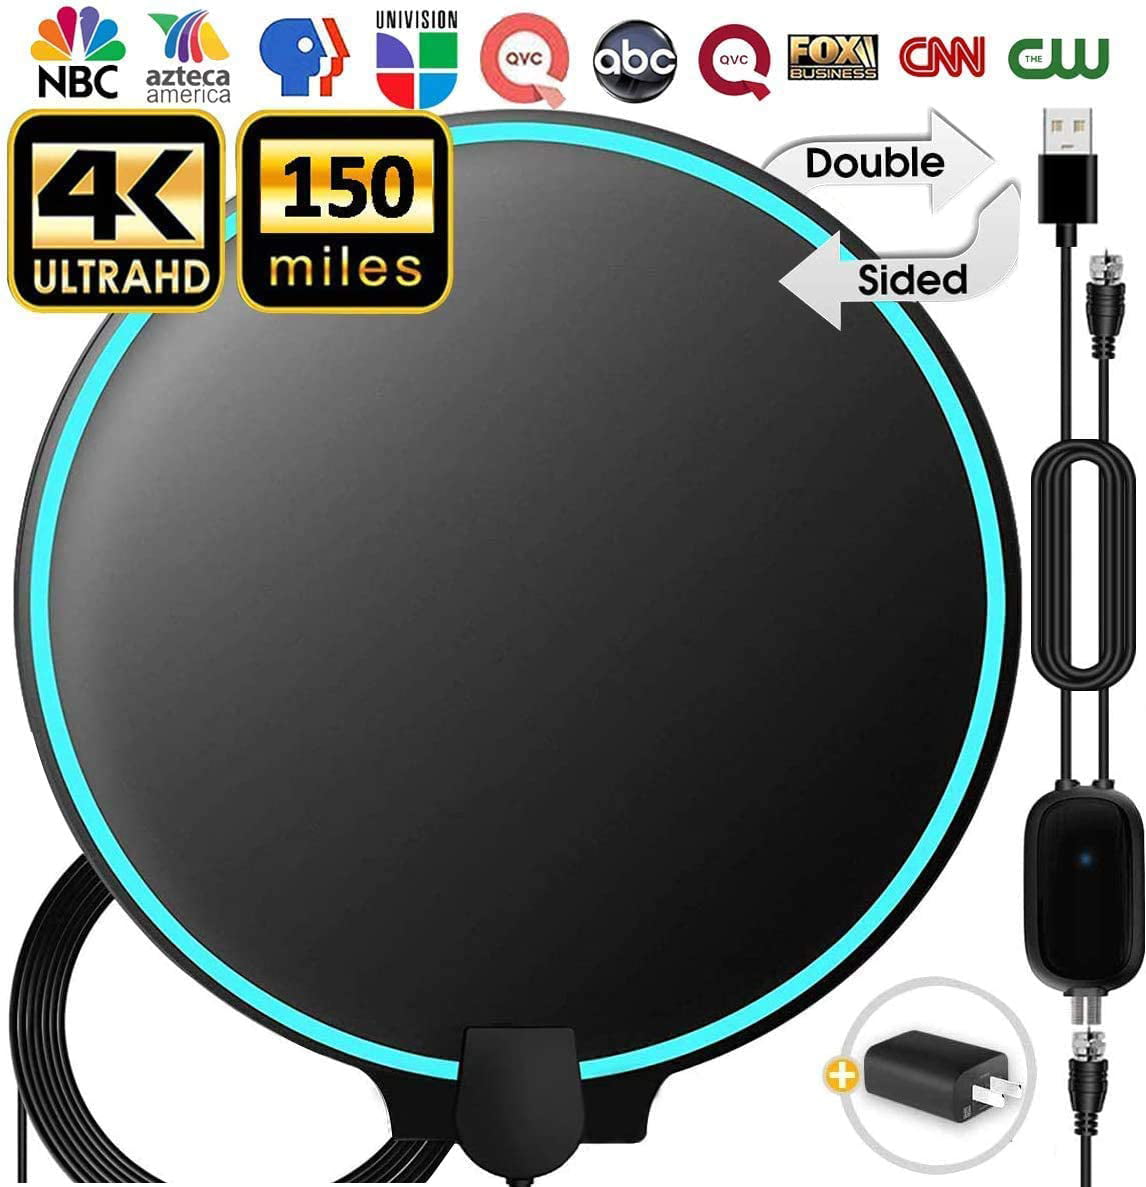 Amplified HD Digital TV Antenna 80-120 Miles Long-Range Reception Support 4K 1080p Indoor TV Digital HD Antenna Freeview Life Local Channels All Type Television Switch Amplifier Signal Booster